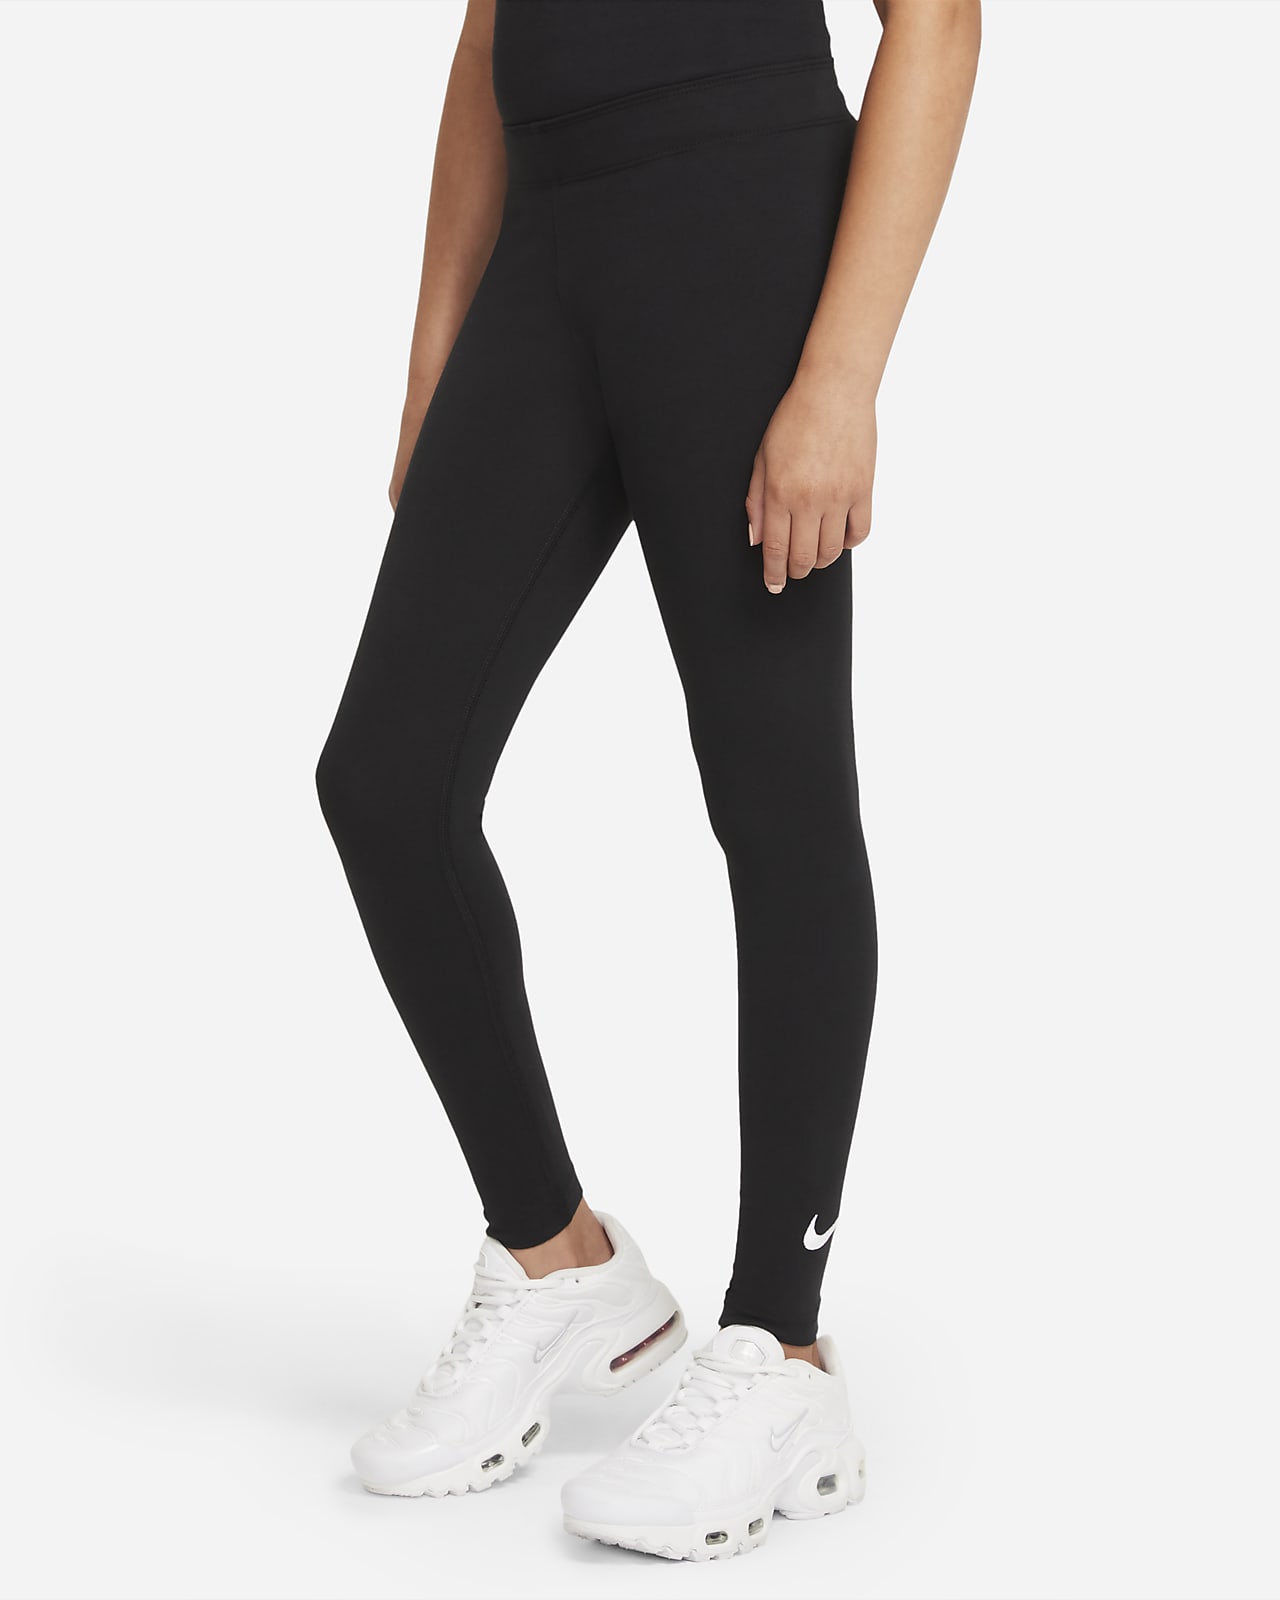 https://static.nike.com/a/images/t_PDP_1280_v1/f_auto,q_auto:eco/5bcc9d84-c05e-49d3-ae8a-5e076fda7210/leggings-con-swoosh-sportswear-favorites-7xvfd1.png